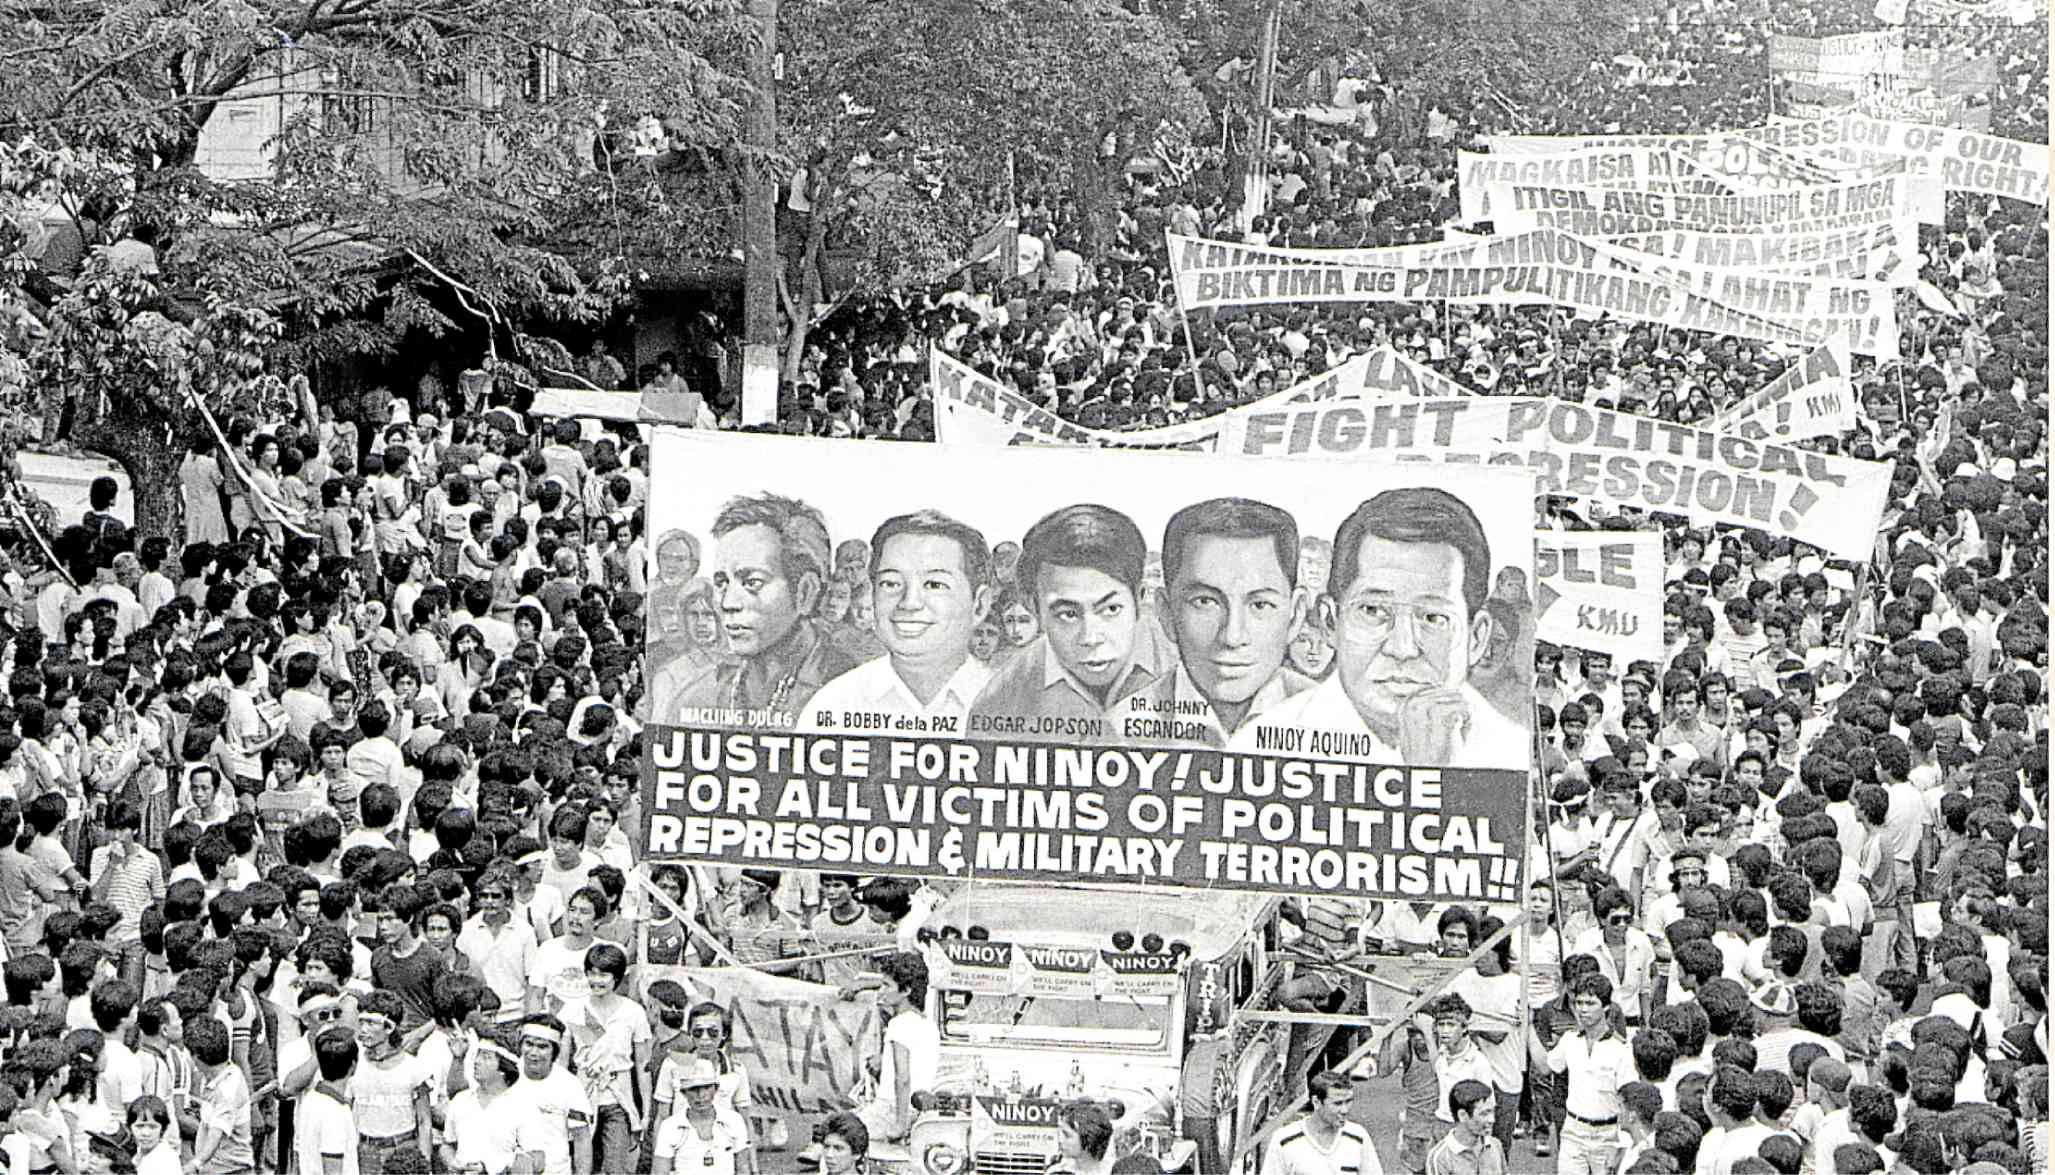 Why Ninoy Aquino’s story is worth repeating, worth remembering